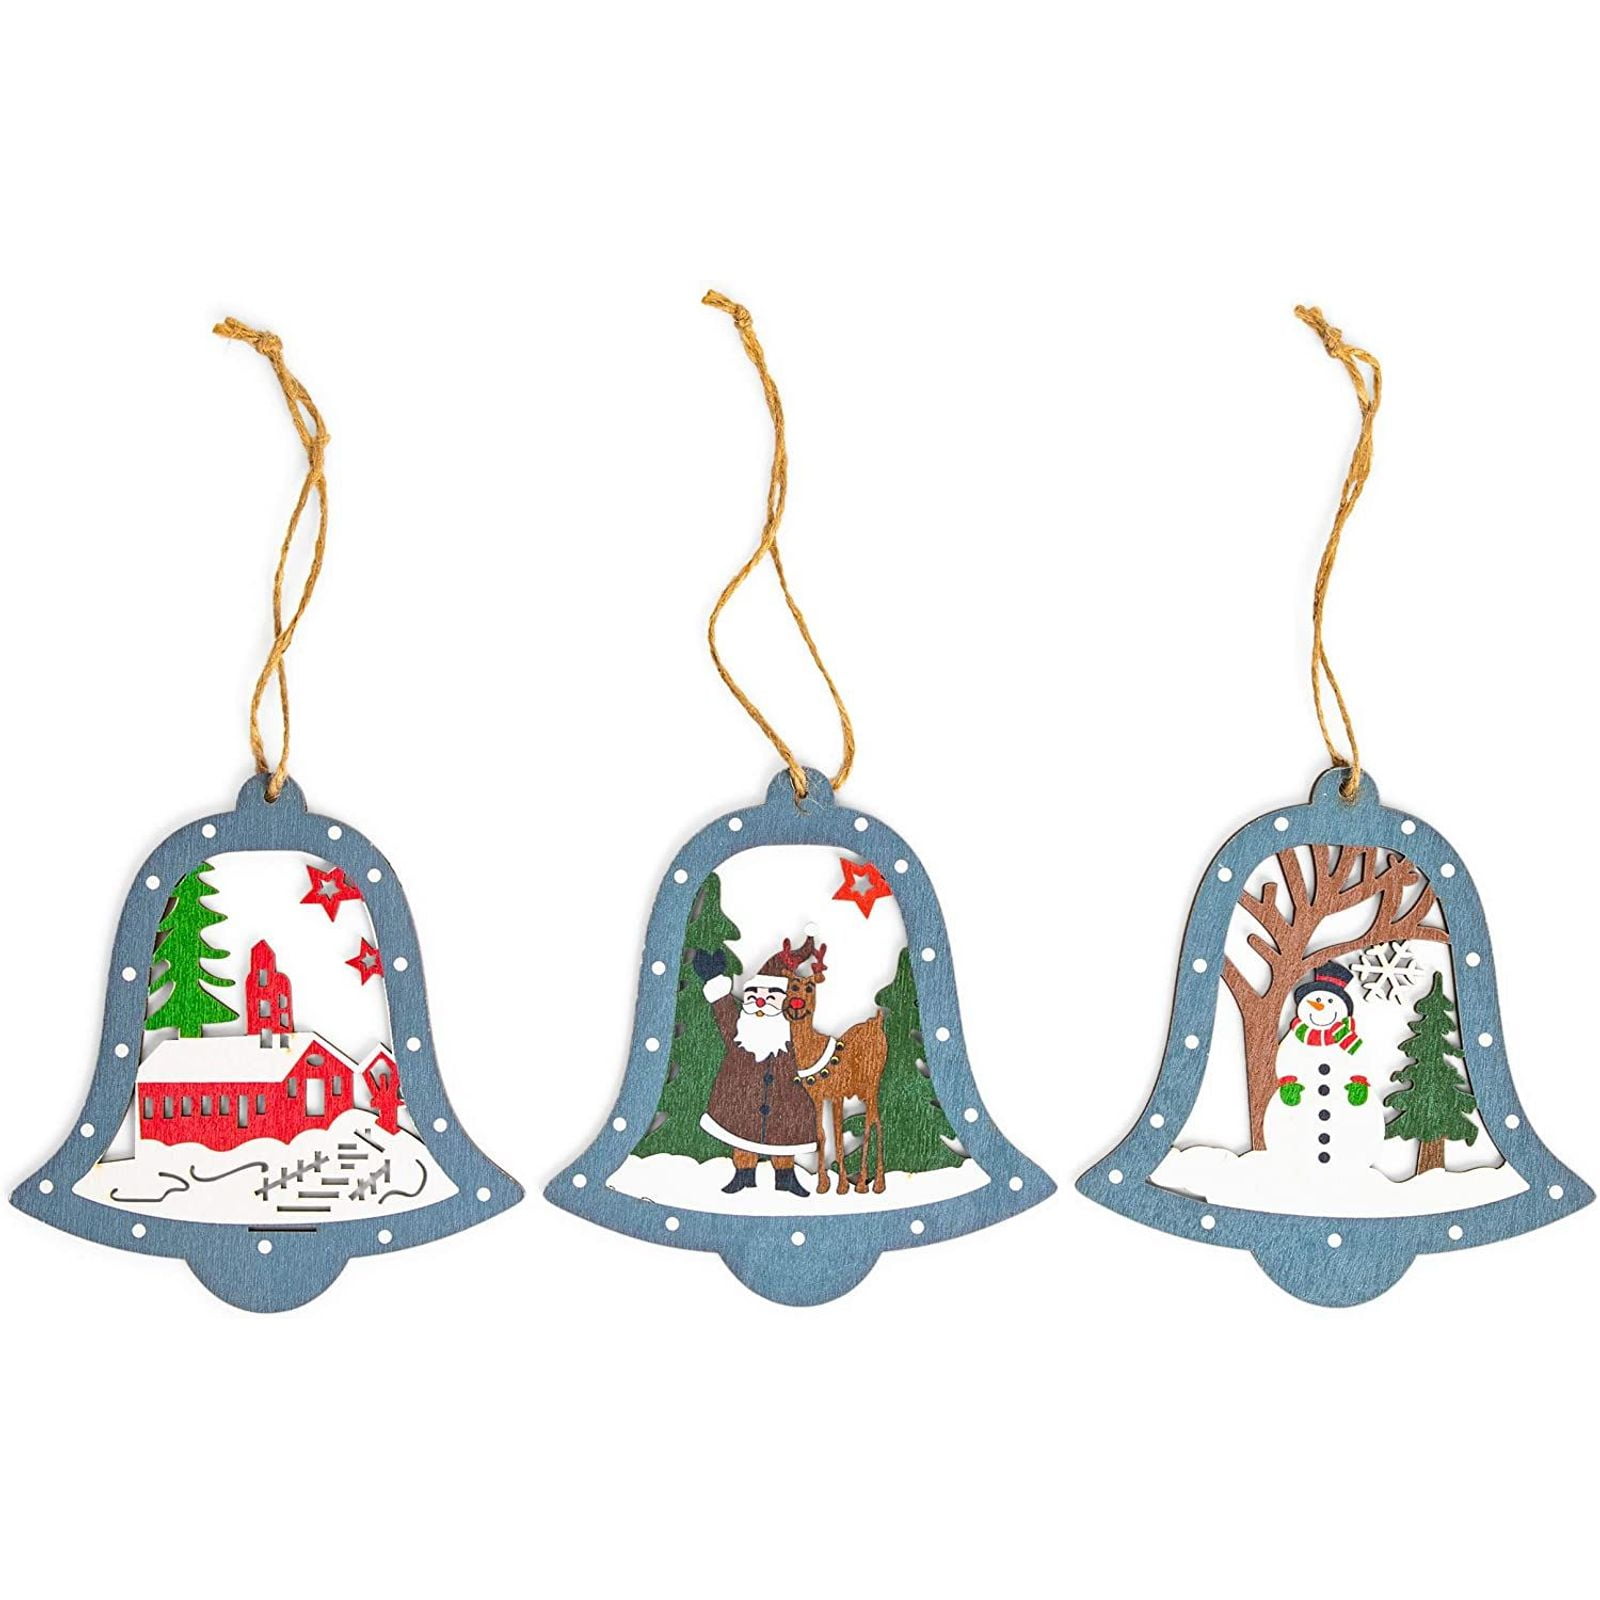 Bigsweety 6PCS Christmas Wooden Ornaments Xmas Tree Hanging Tags Pendant Hollow Out Ornaments for Christmas Decorations